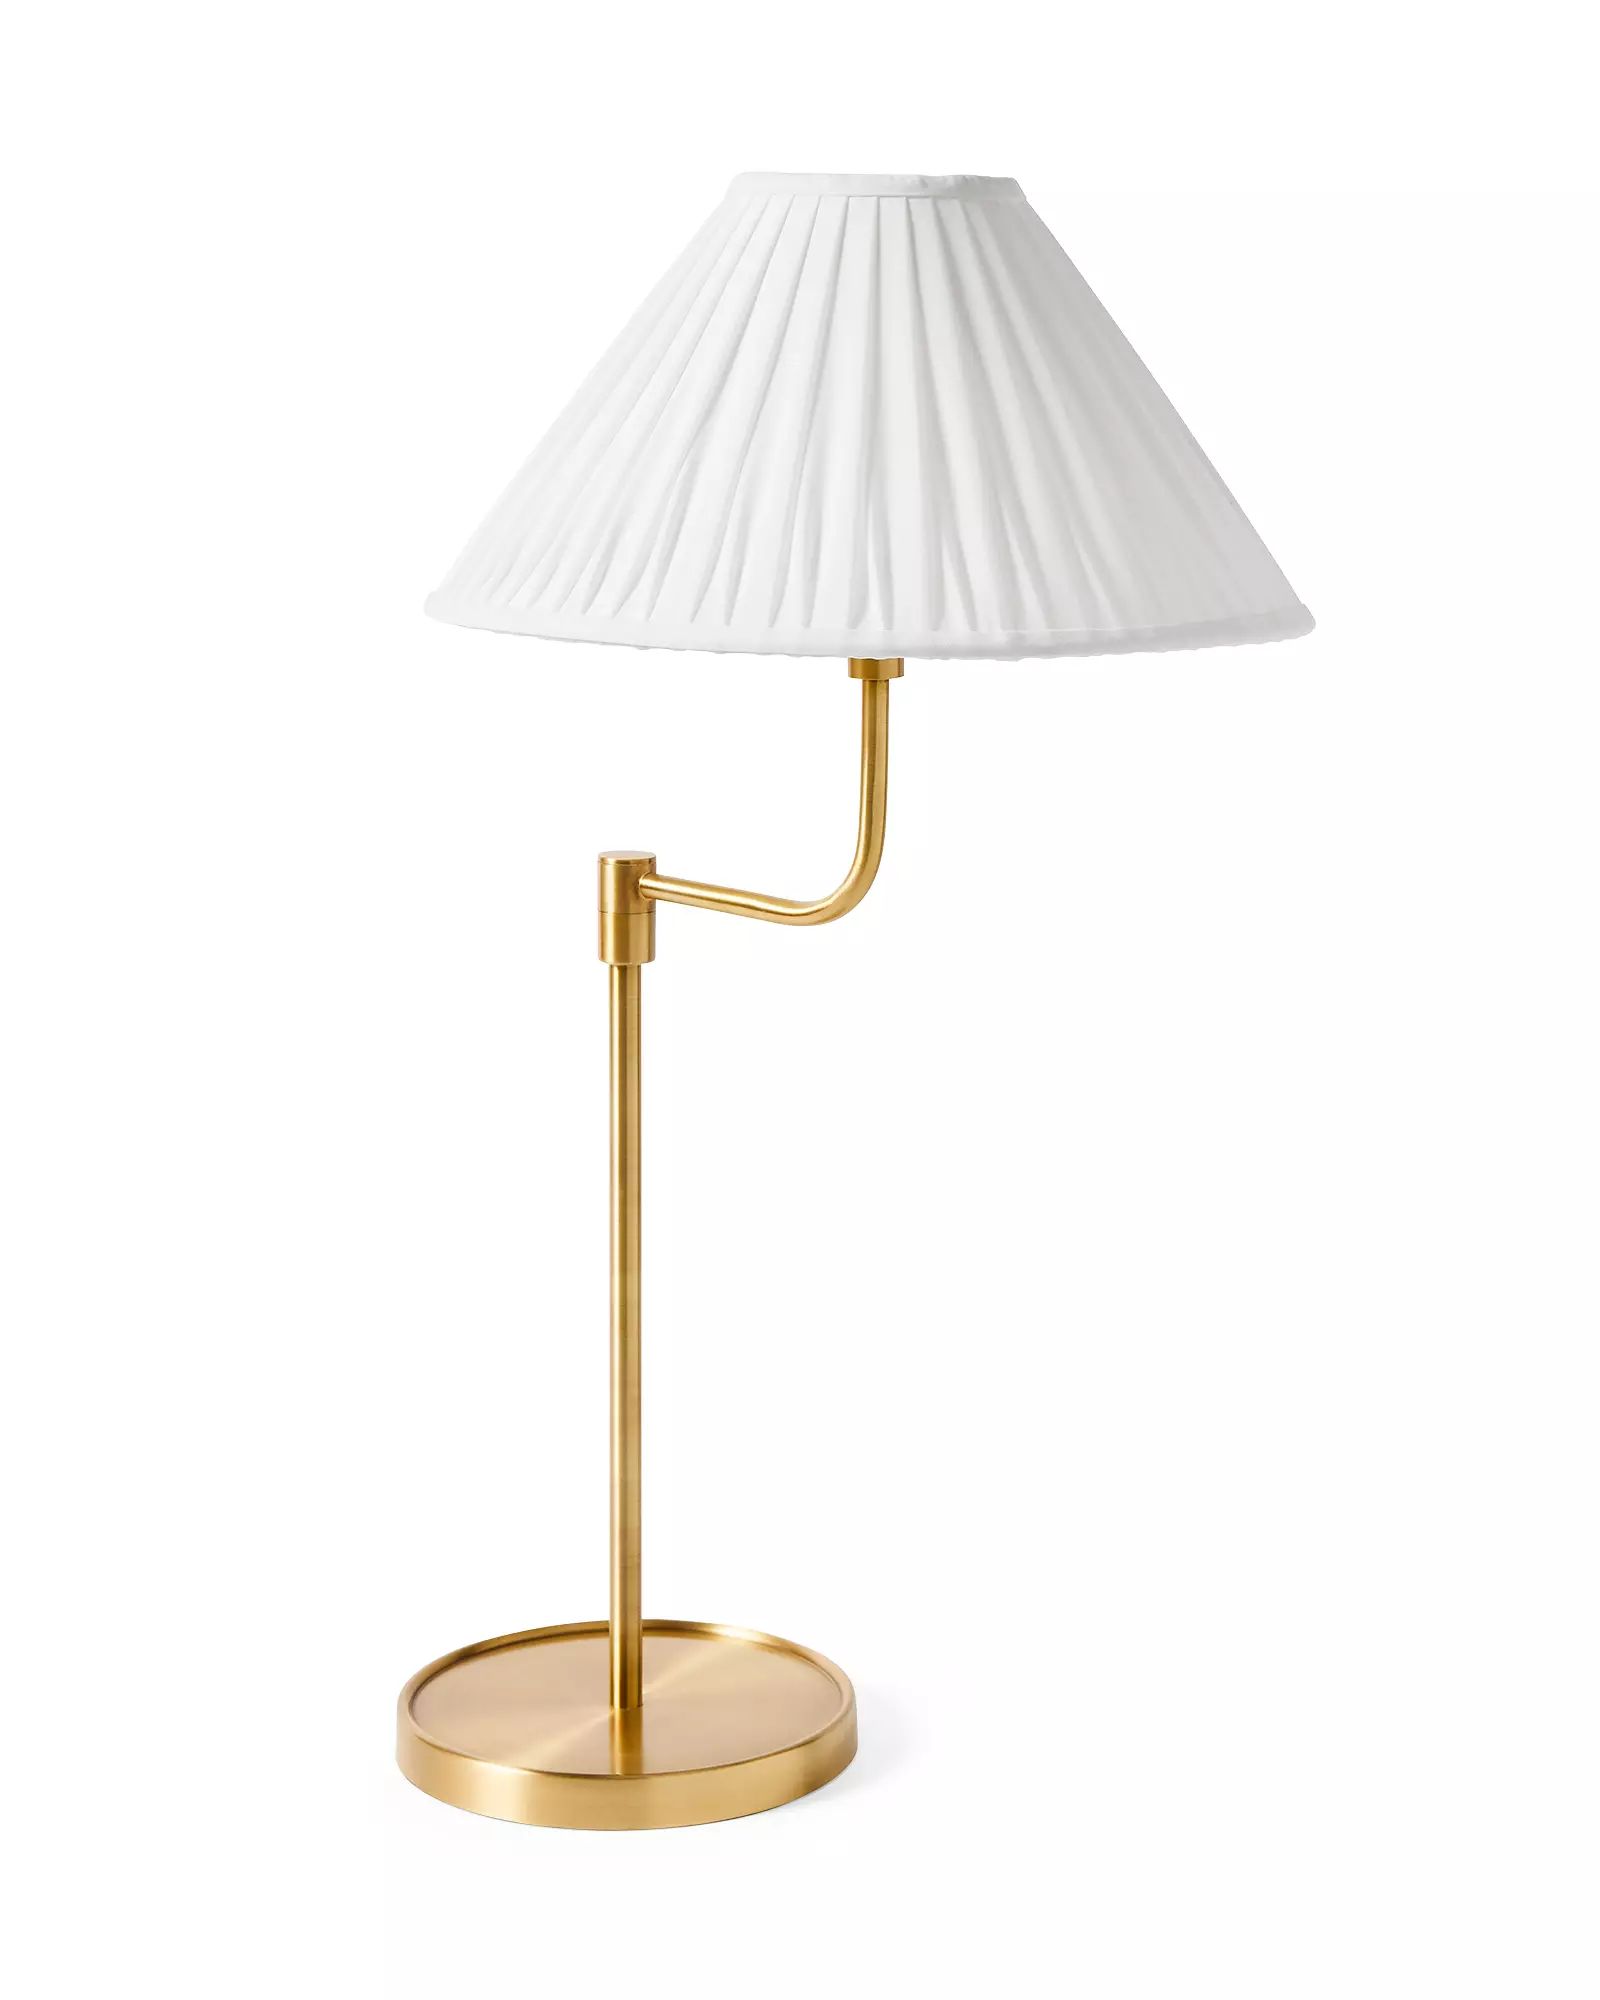 Marseille Table Lamp | Serena and Lily